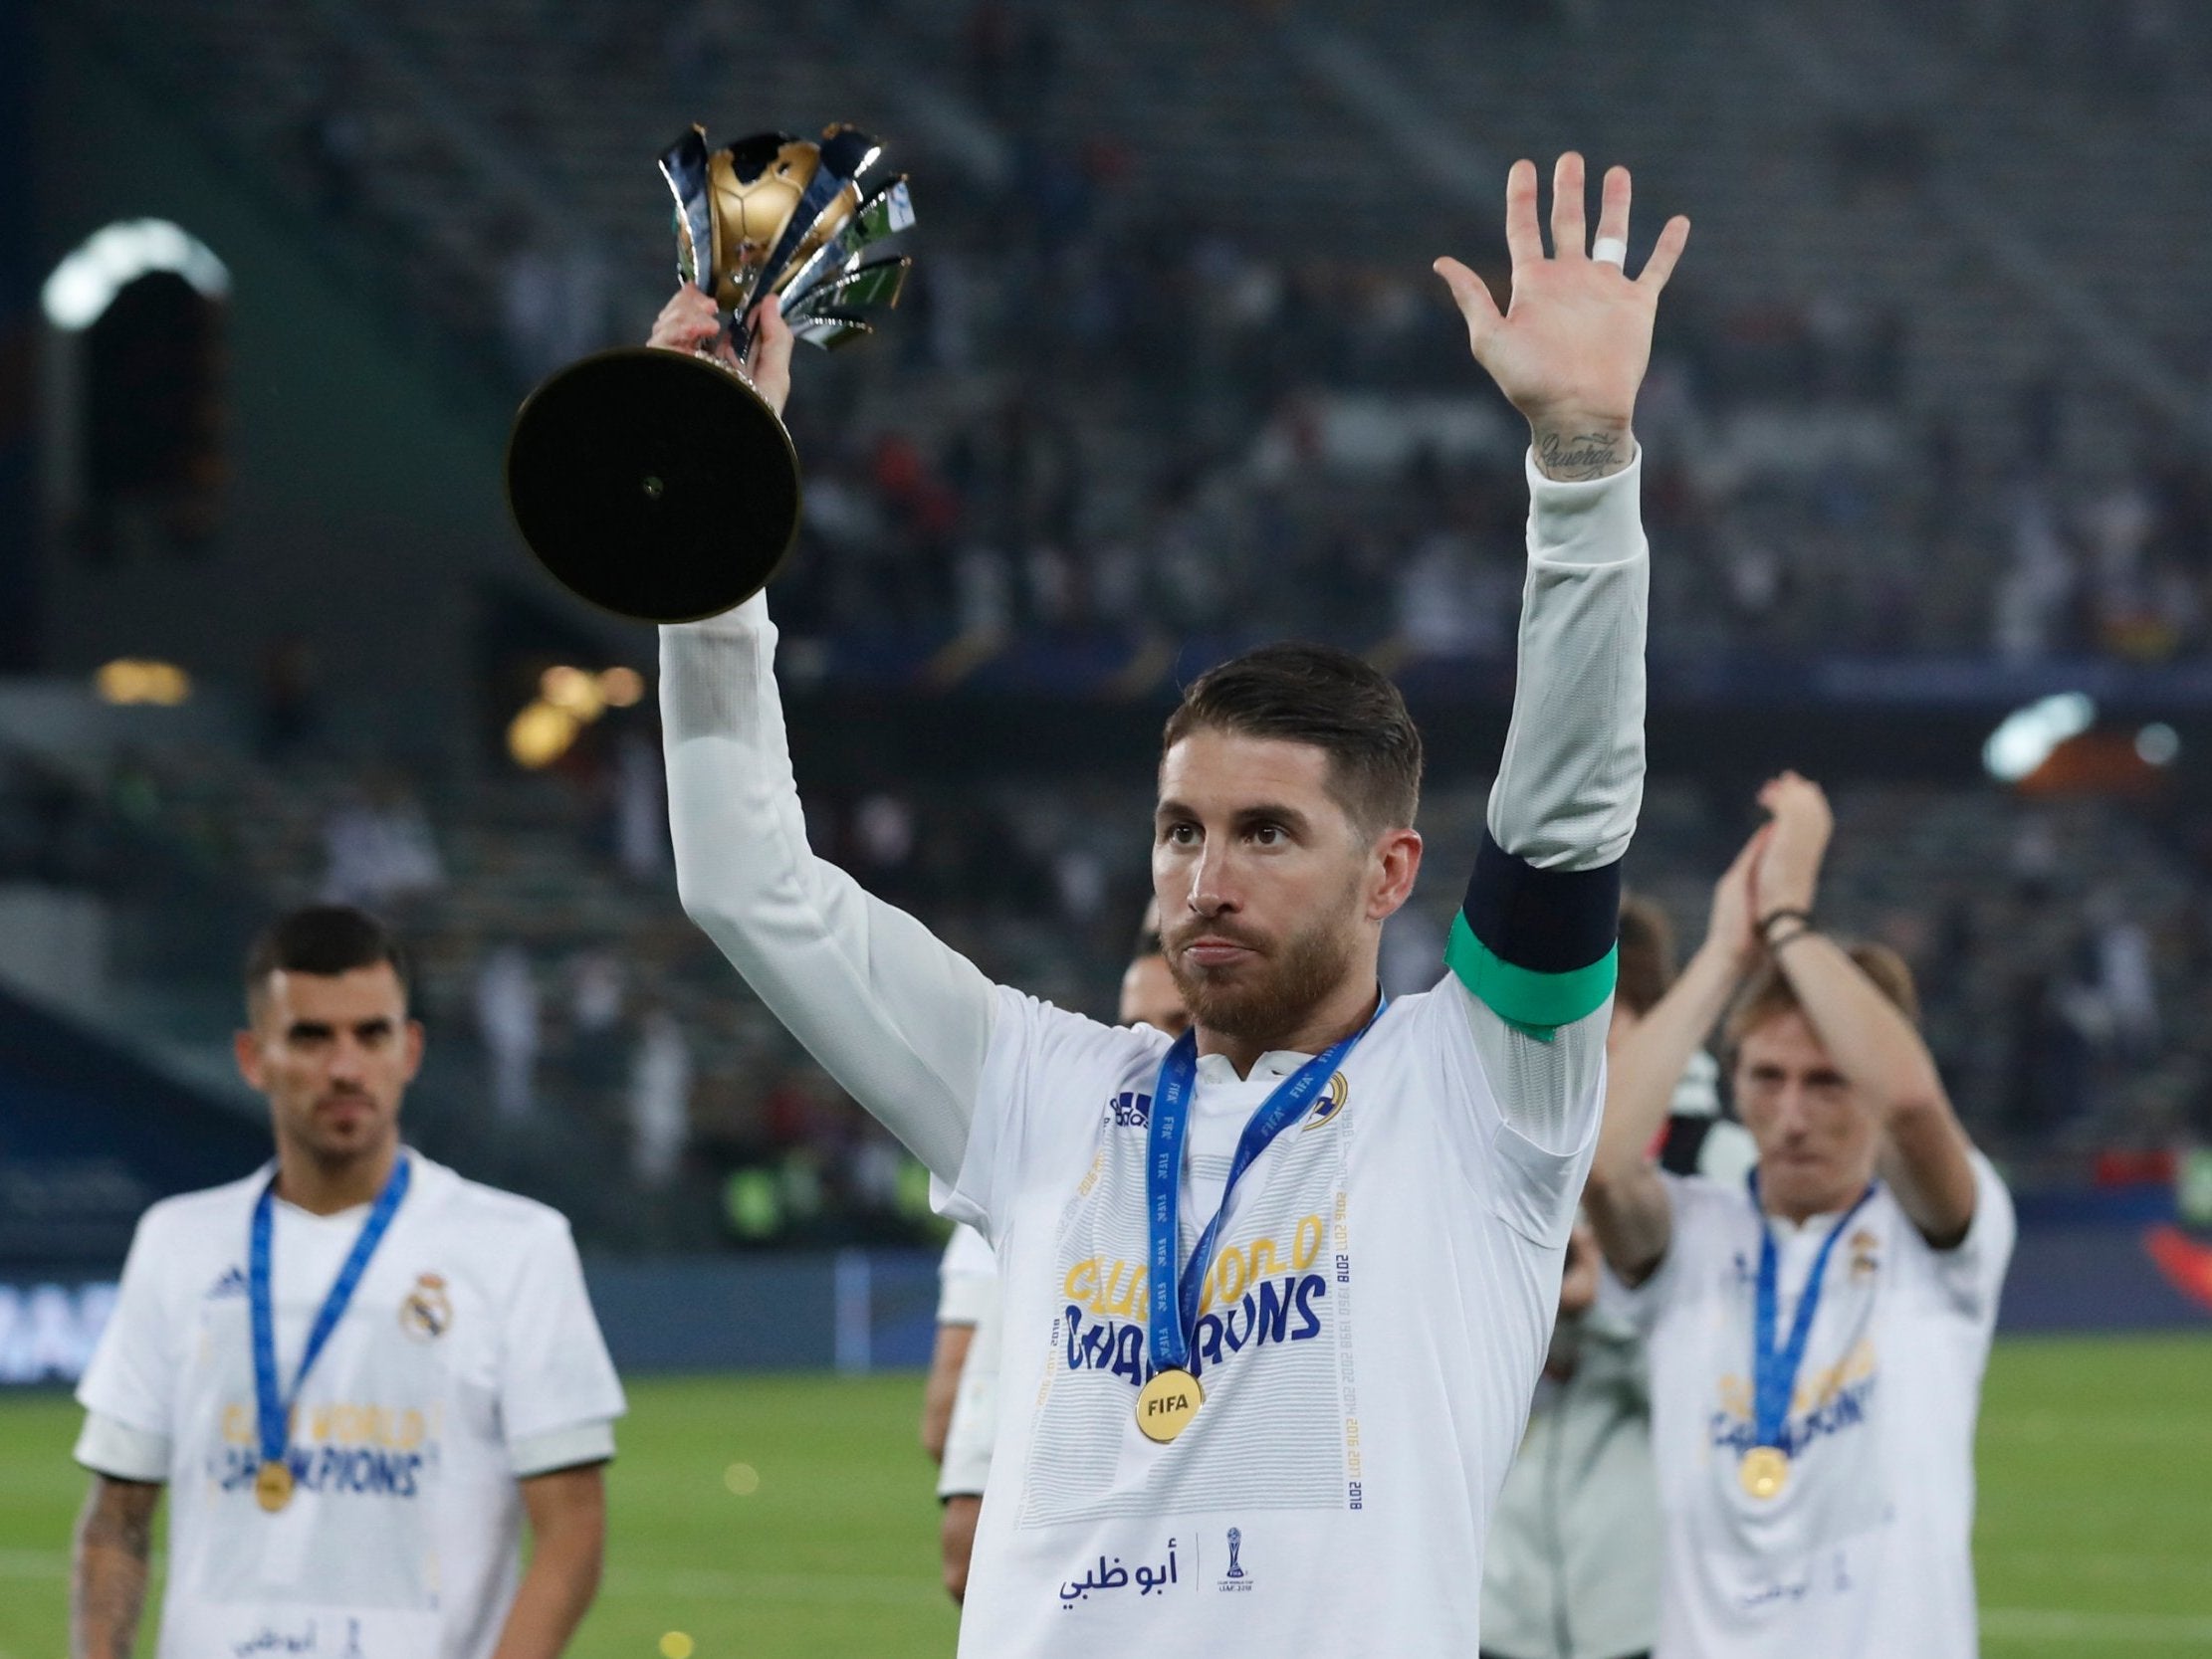 Sergio Ramos picked up his fourth Fifa Club World Cup on Sunday